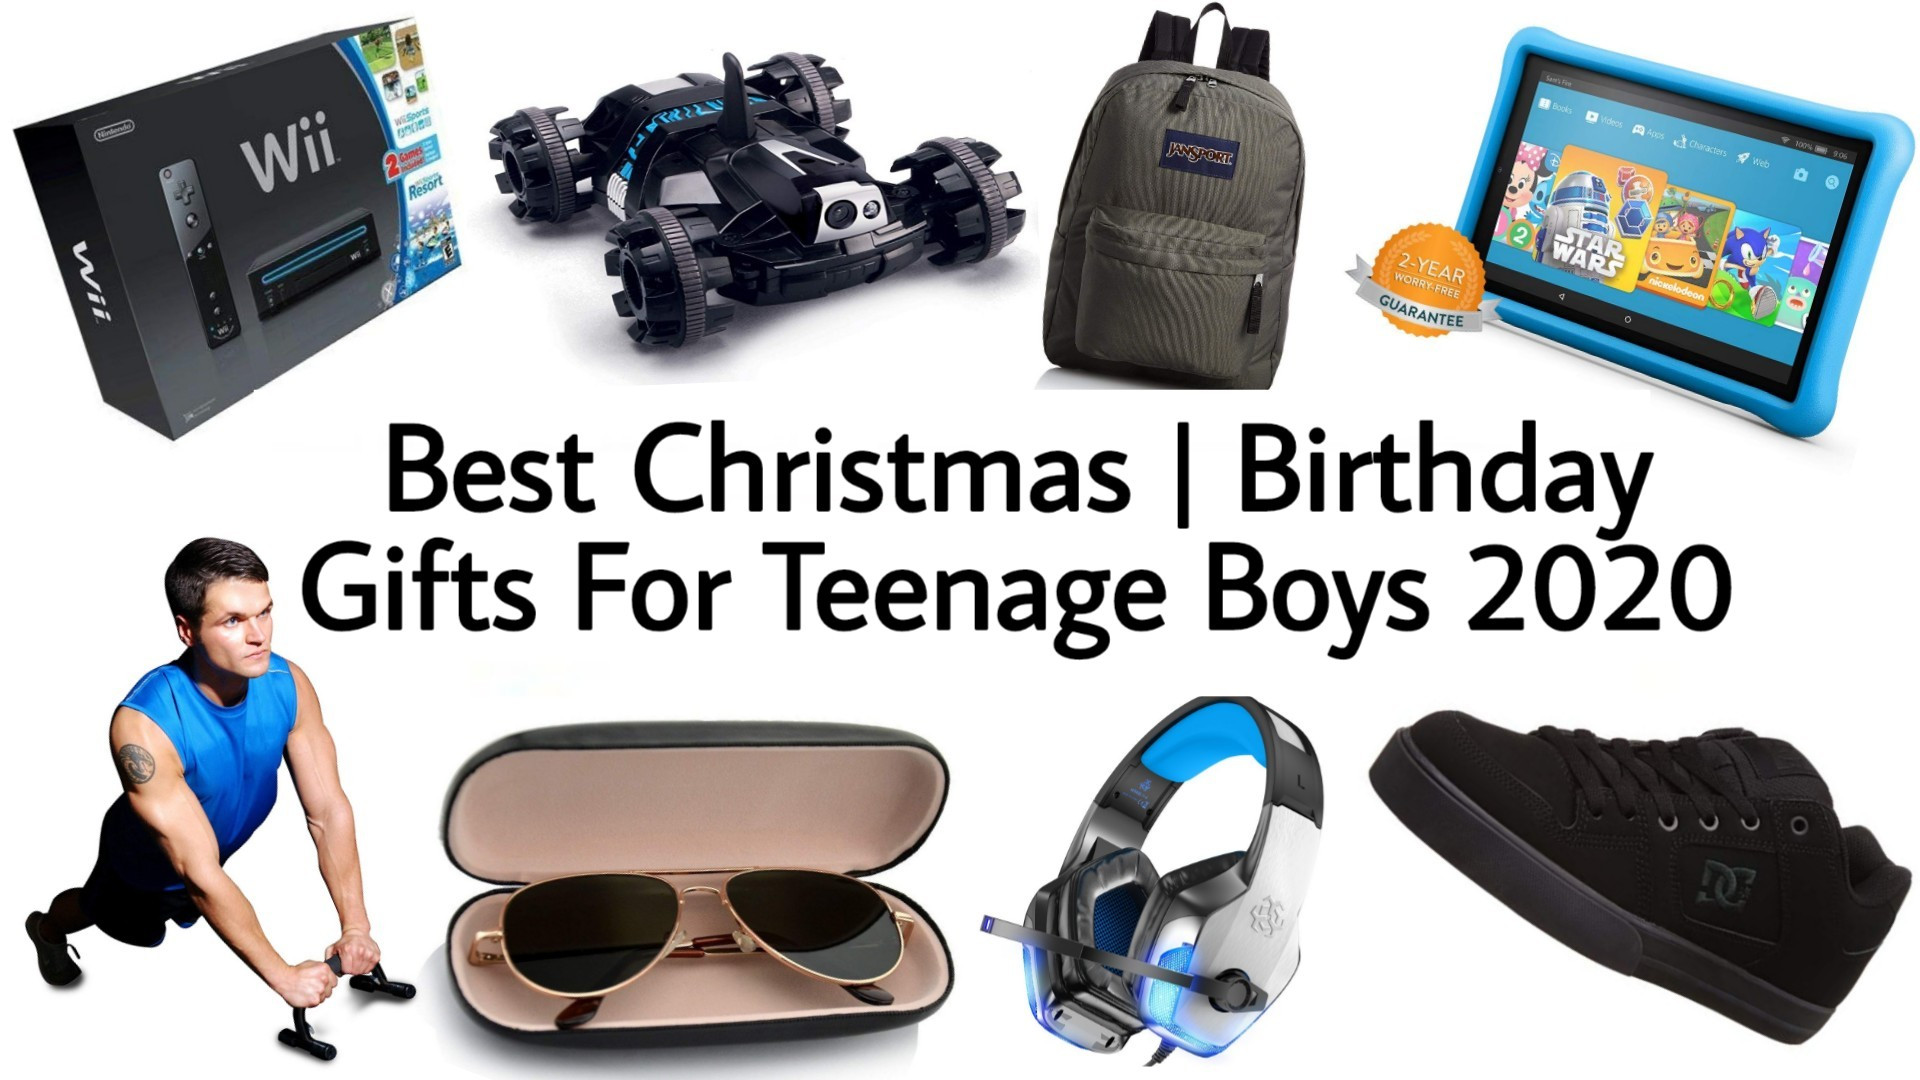 Holiday Gift Ideas 2020
 Best Christmas Gifts for Teenage Boys 2020